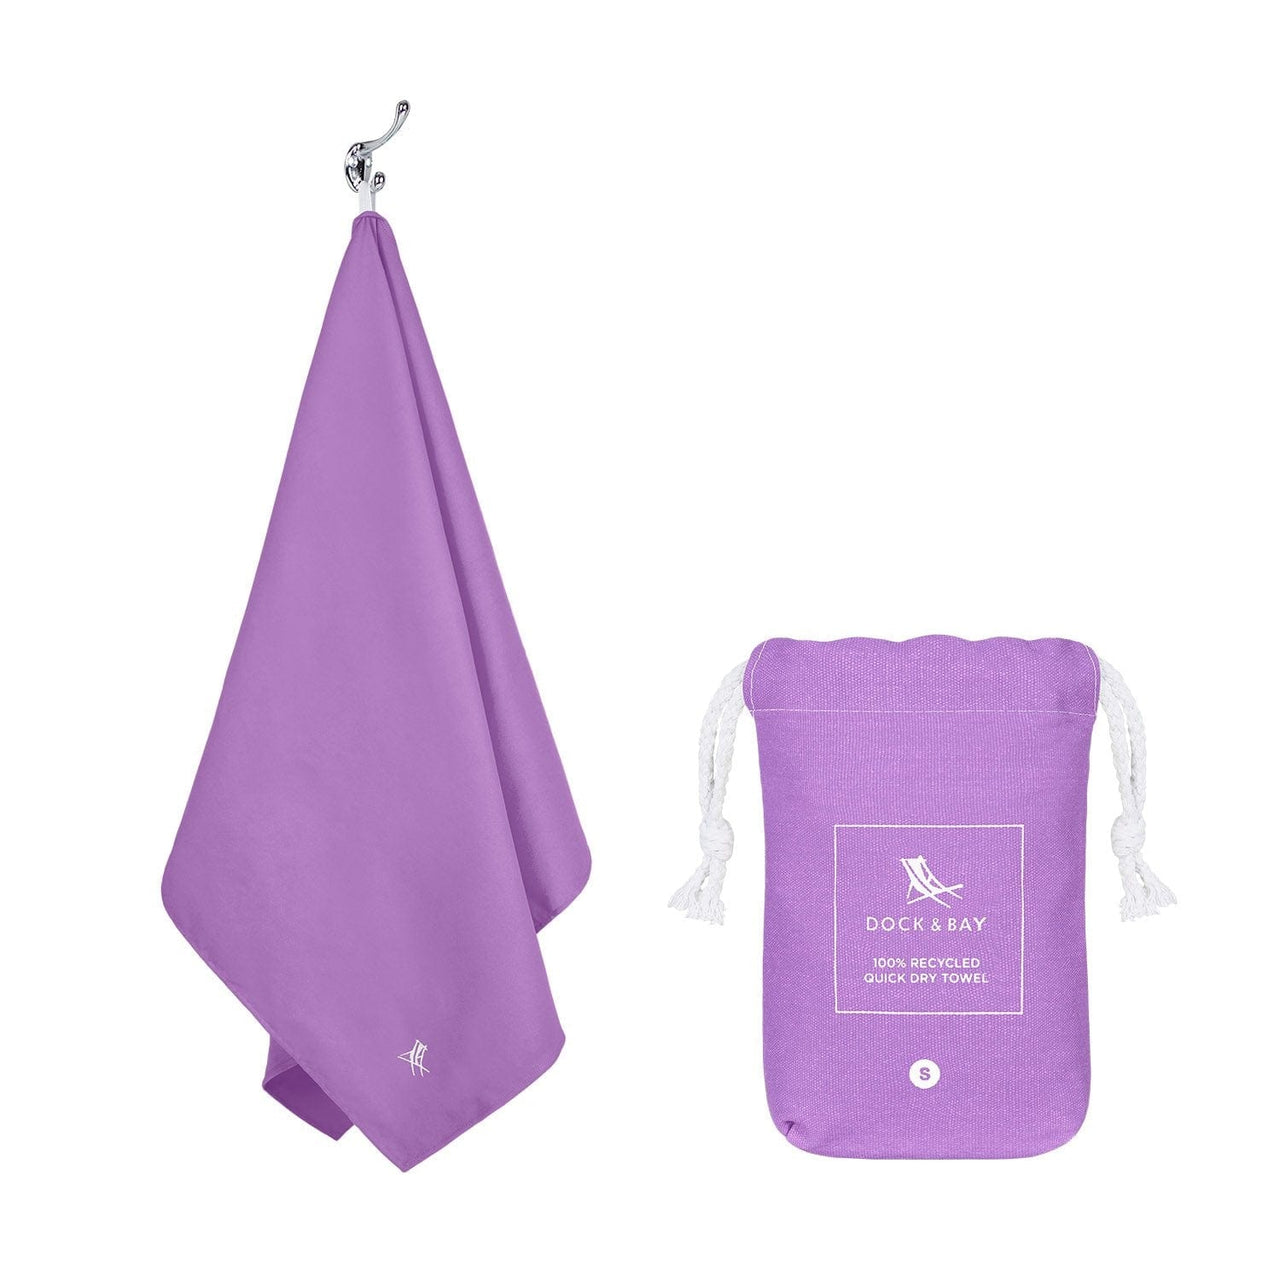 Dock & Bay Beach Towels Extra Large (79x35") / Purple QUICK DRY TOWEL - CLASSIC COLLECTION